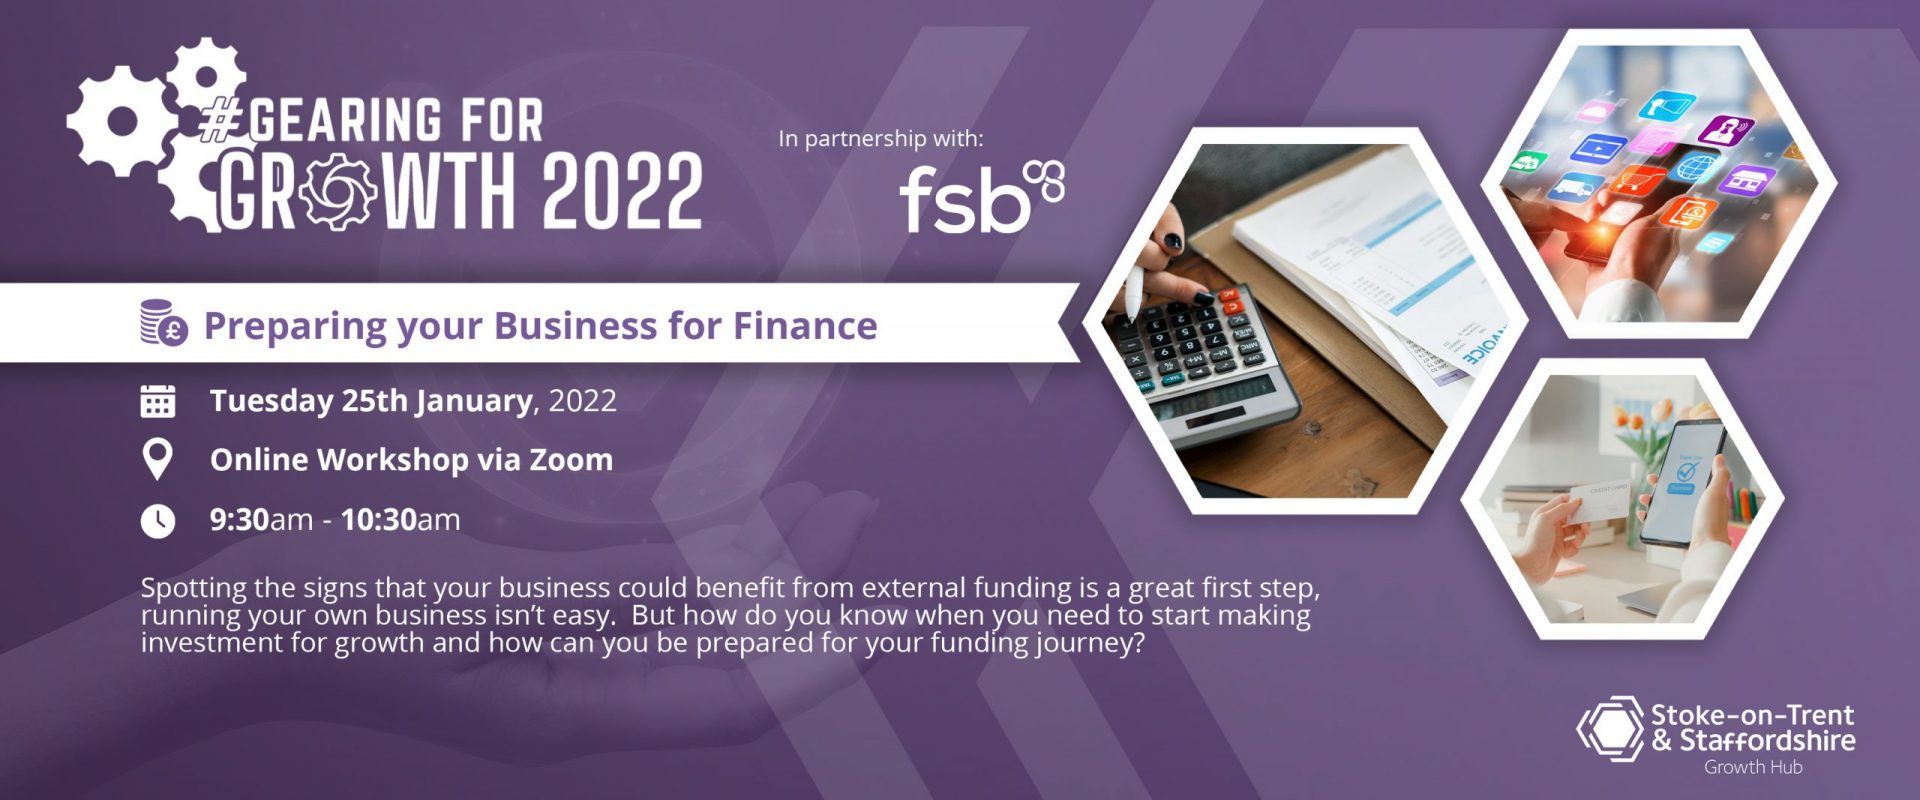 #GEARINGFORGROWTH2022: Preparing your Business for Finance